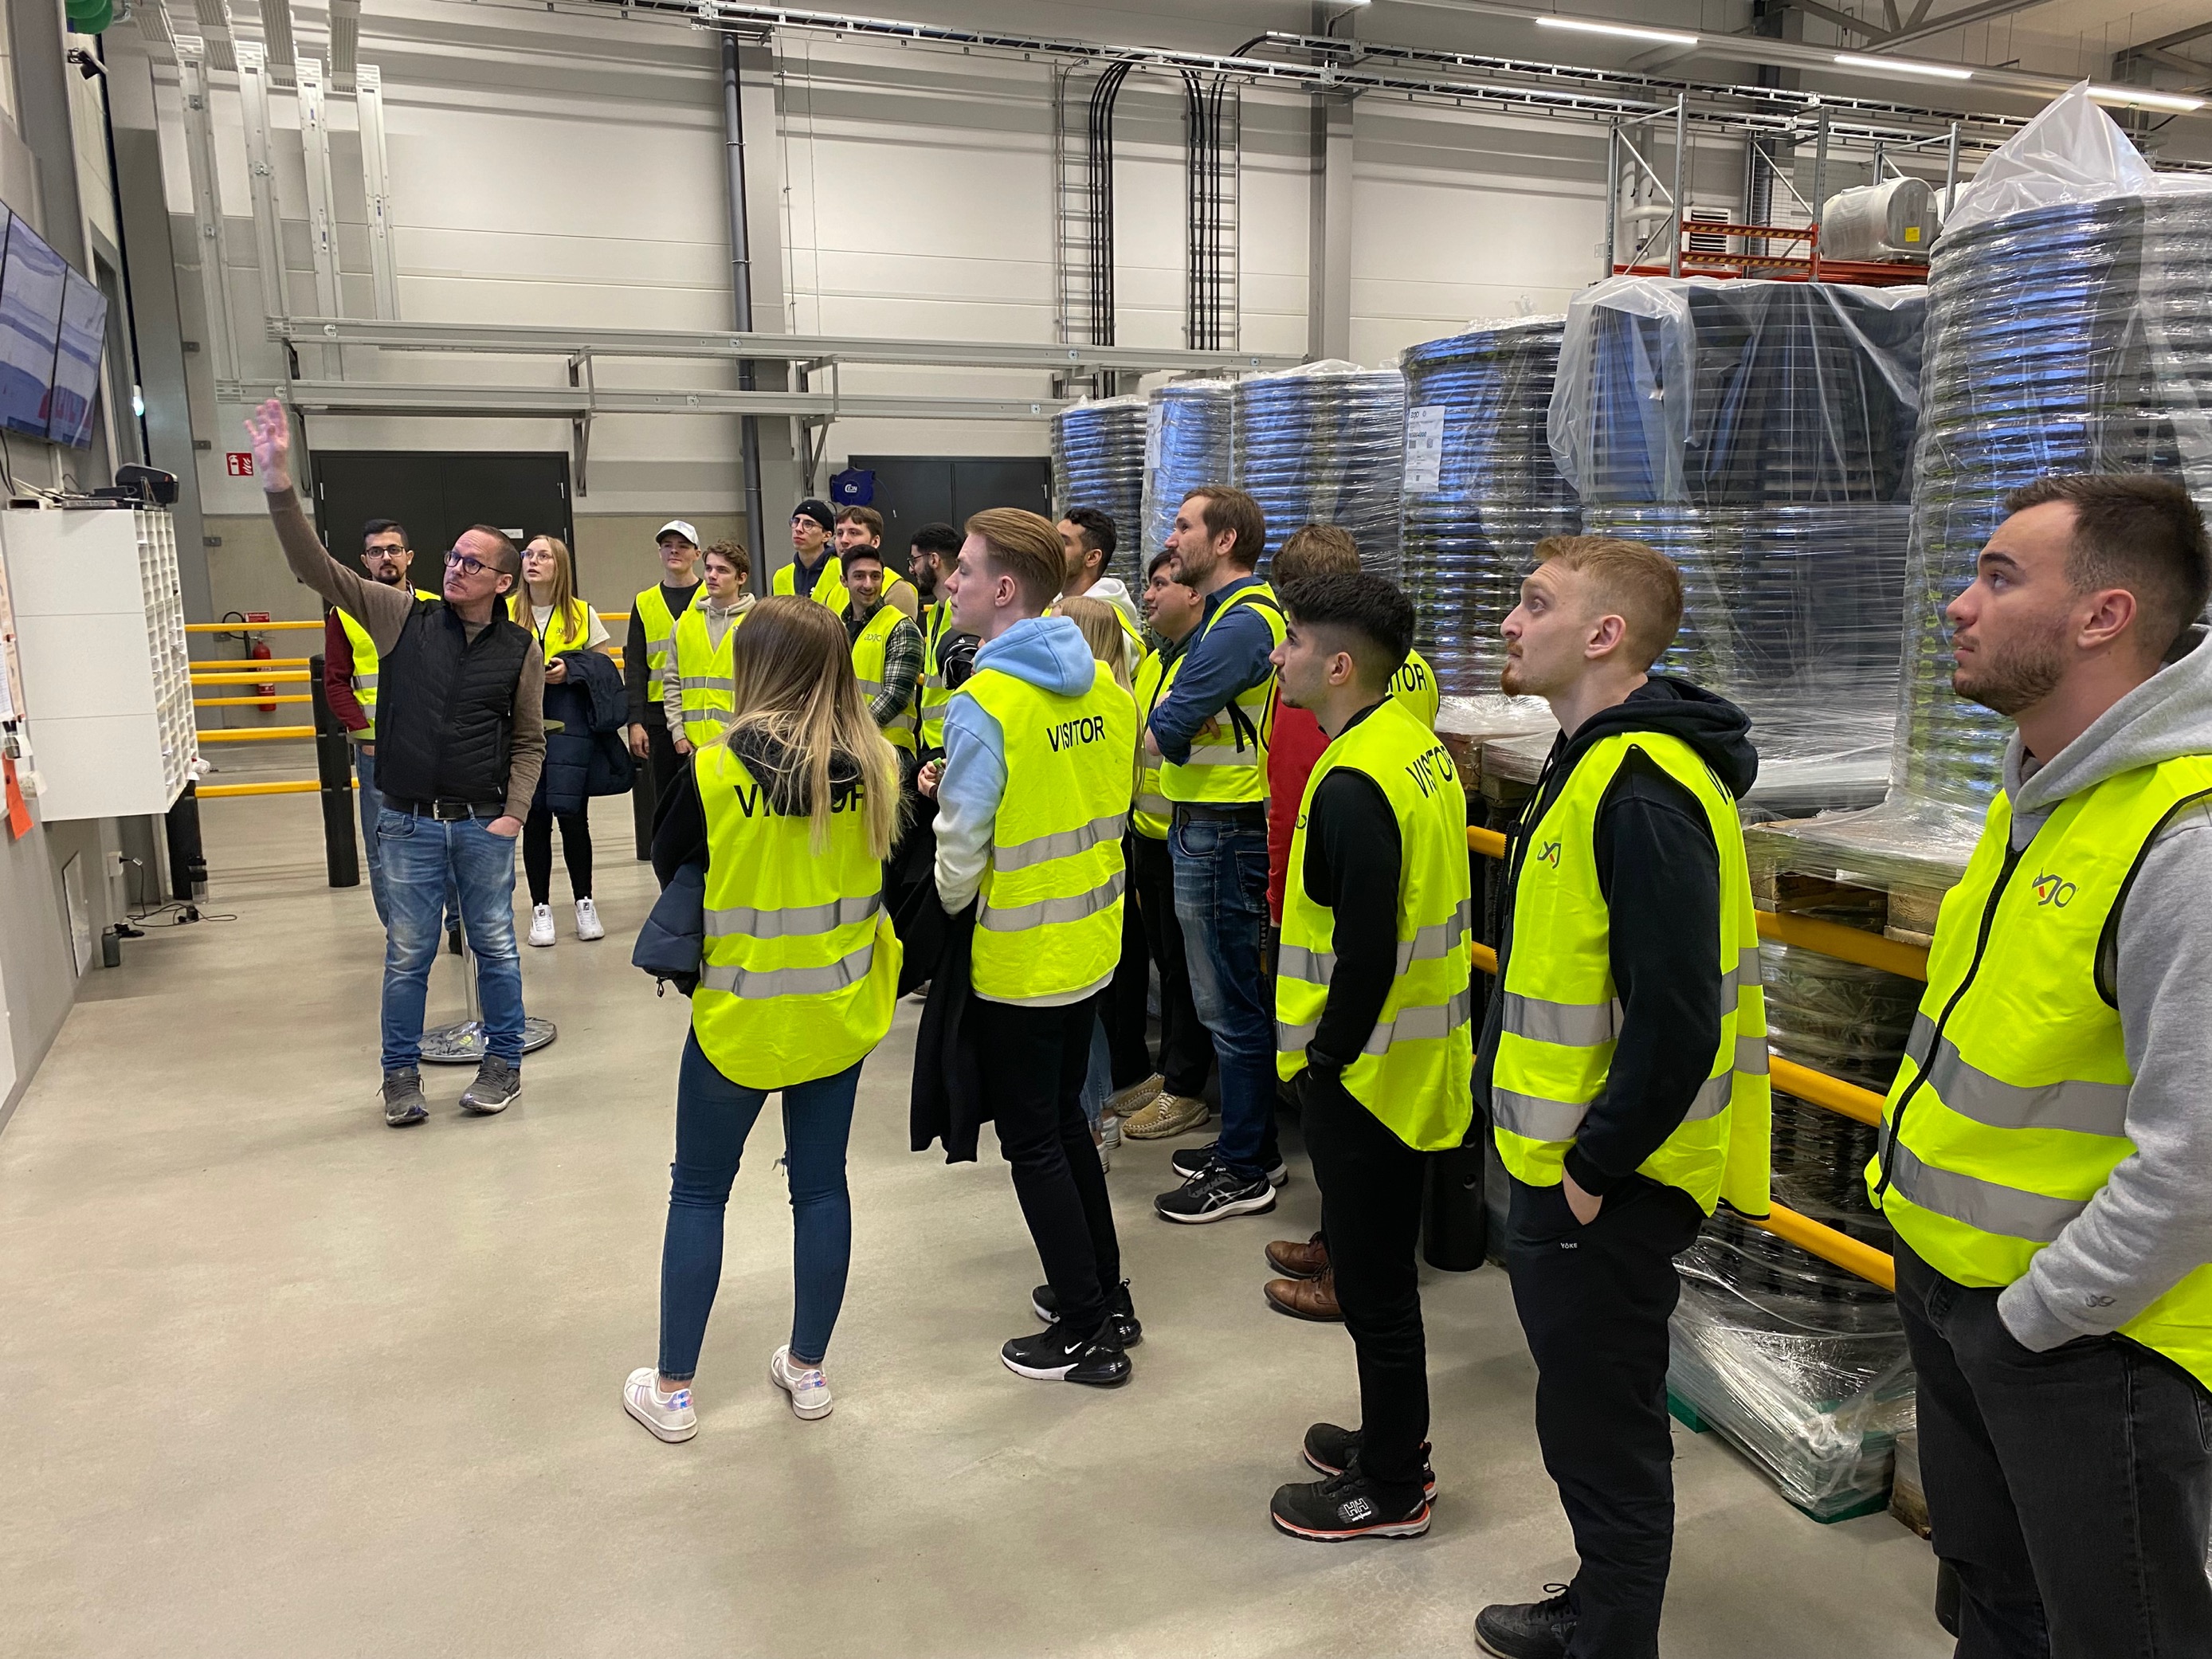 JTH students on a company visit.